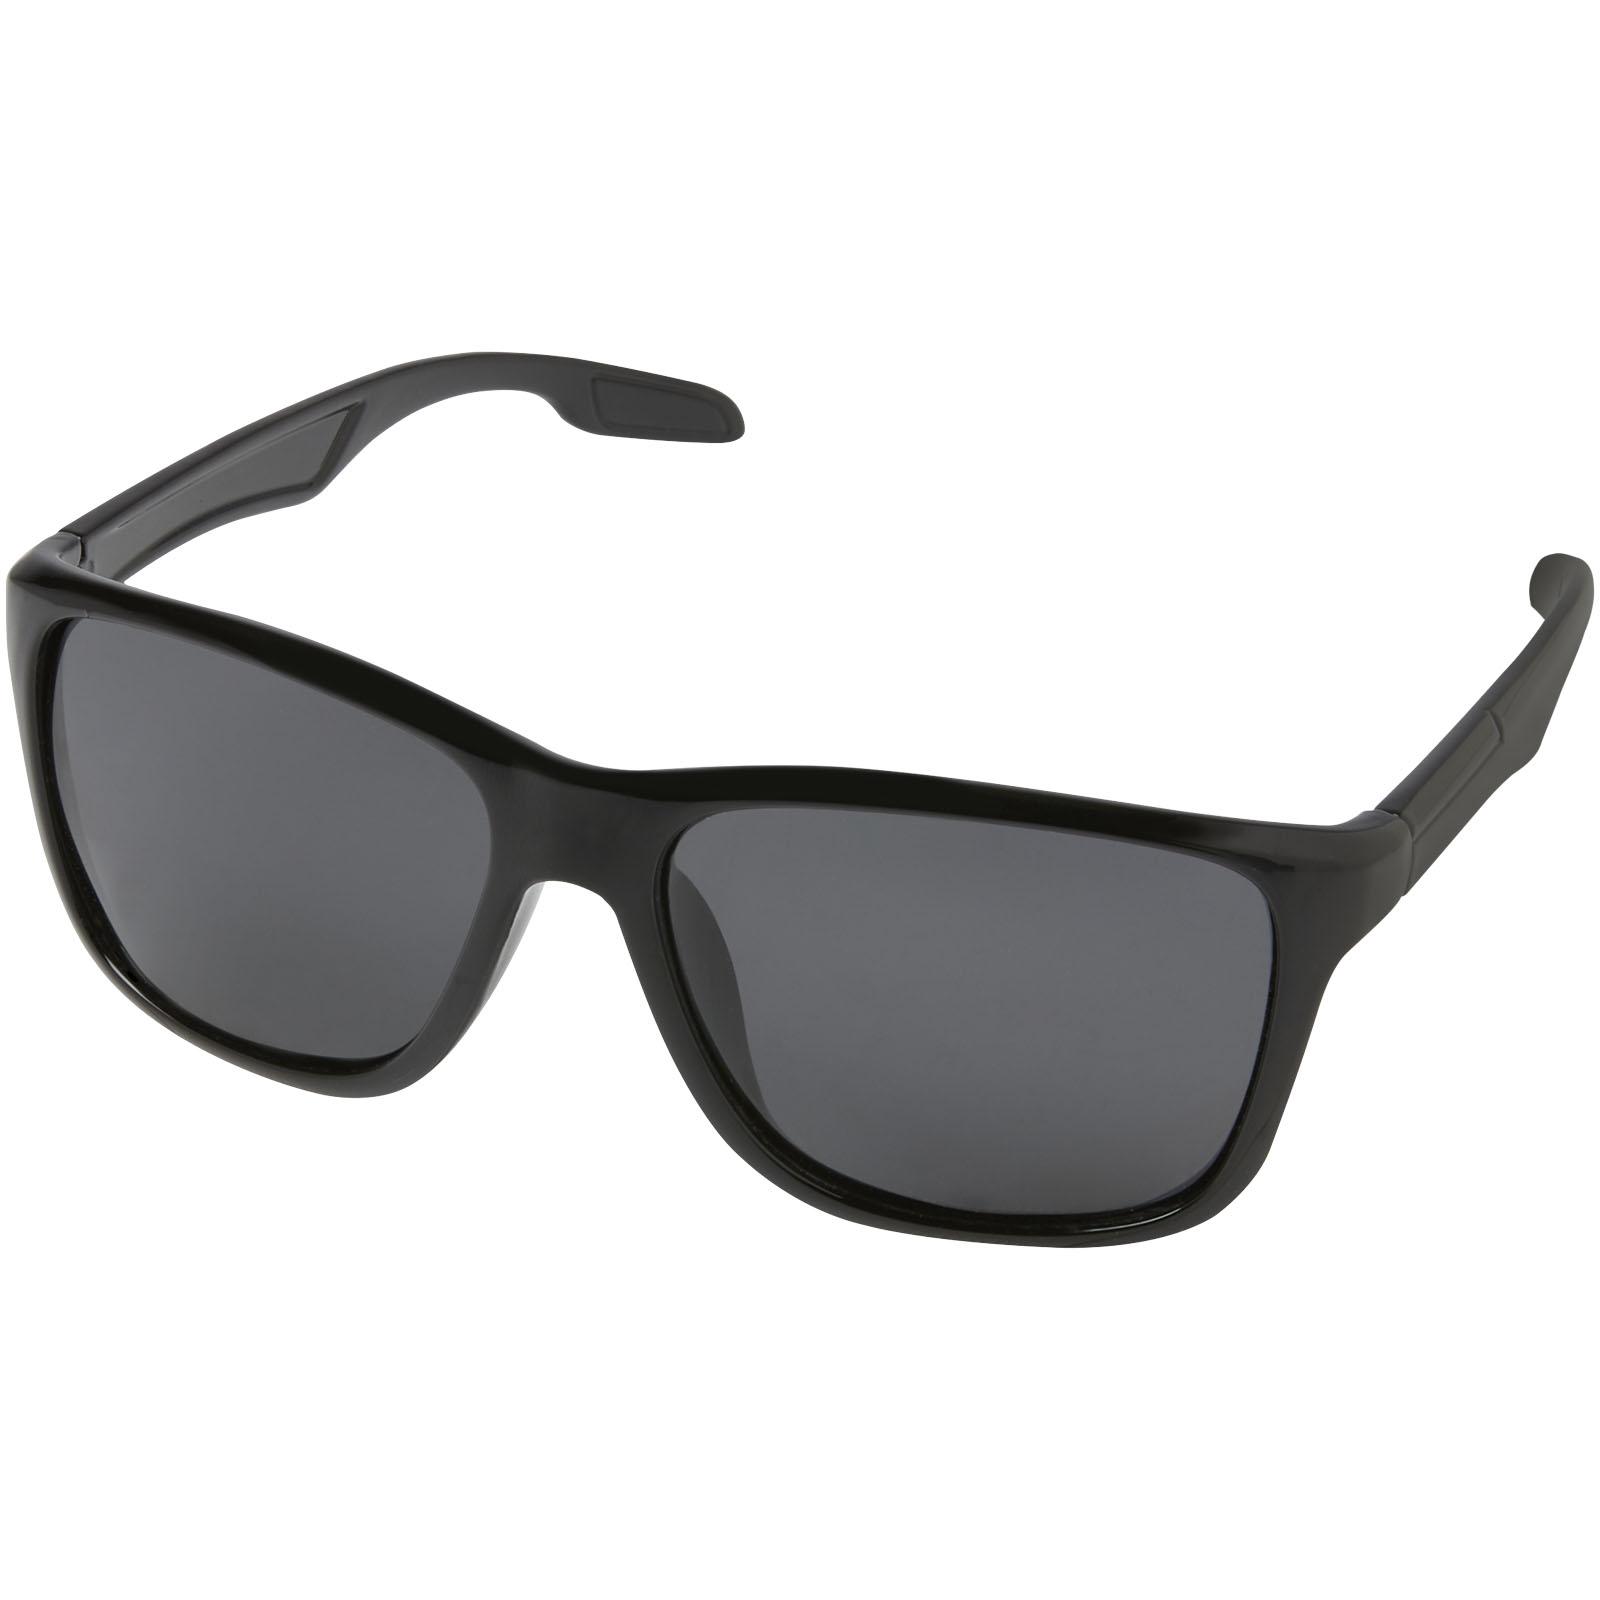 Advertising Sunglasses - Eiger polarized sunglasses in recycled PET casing - 0